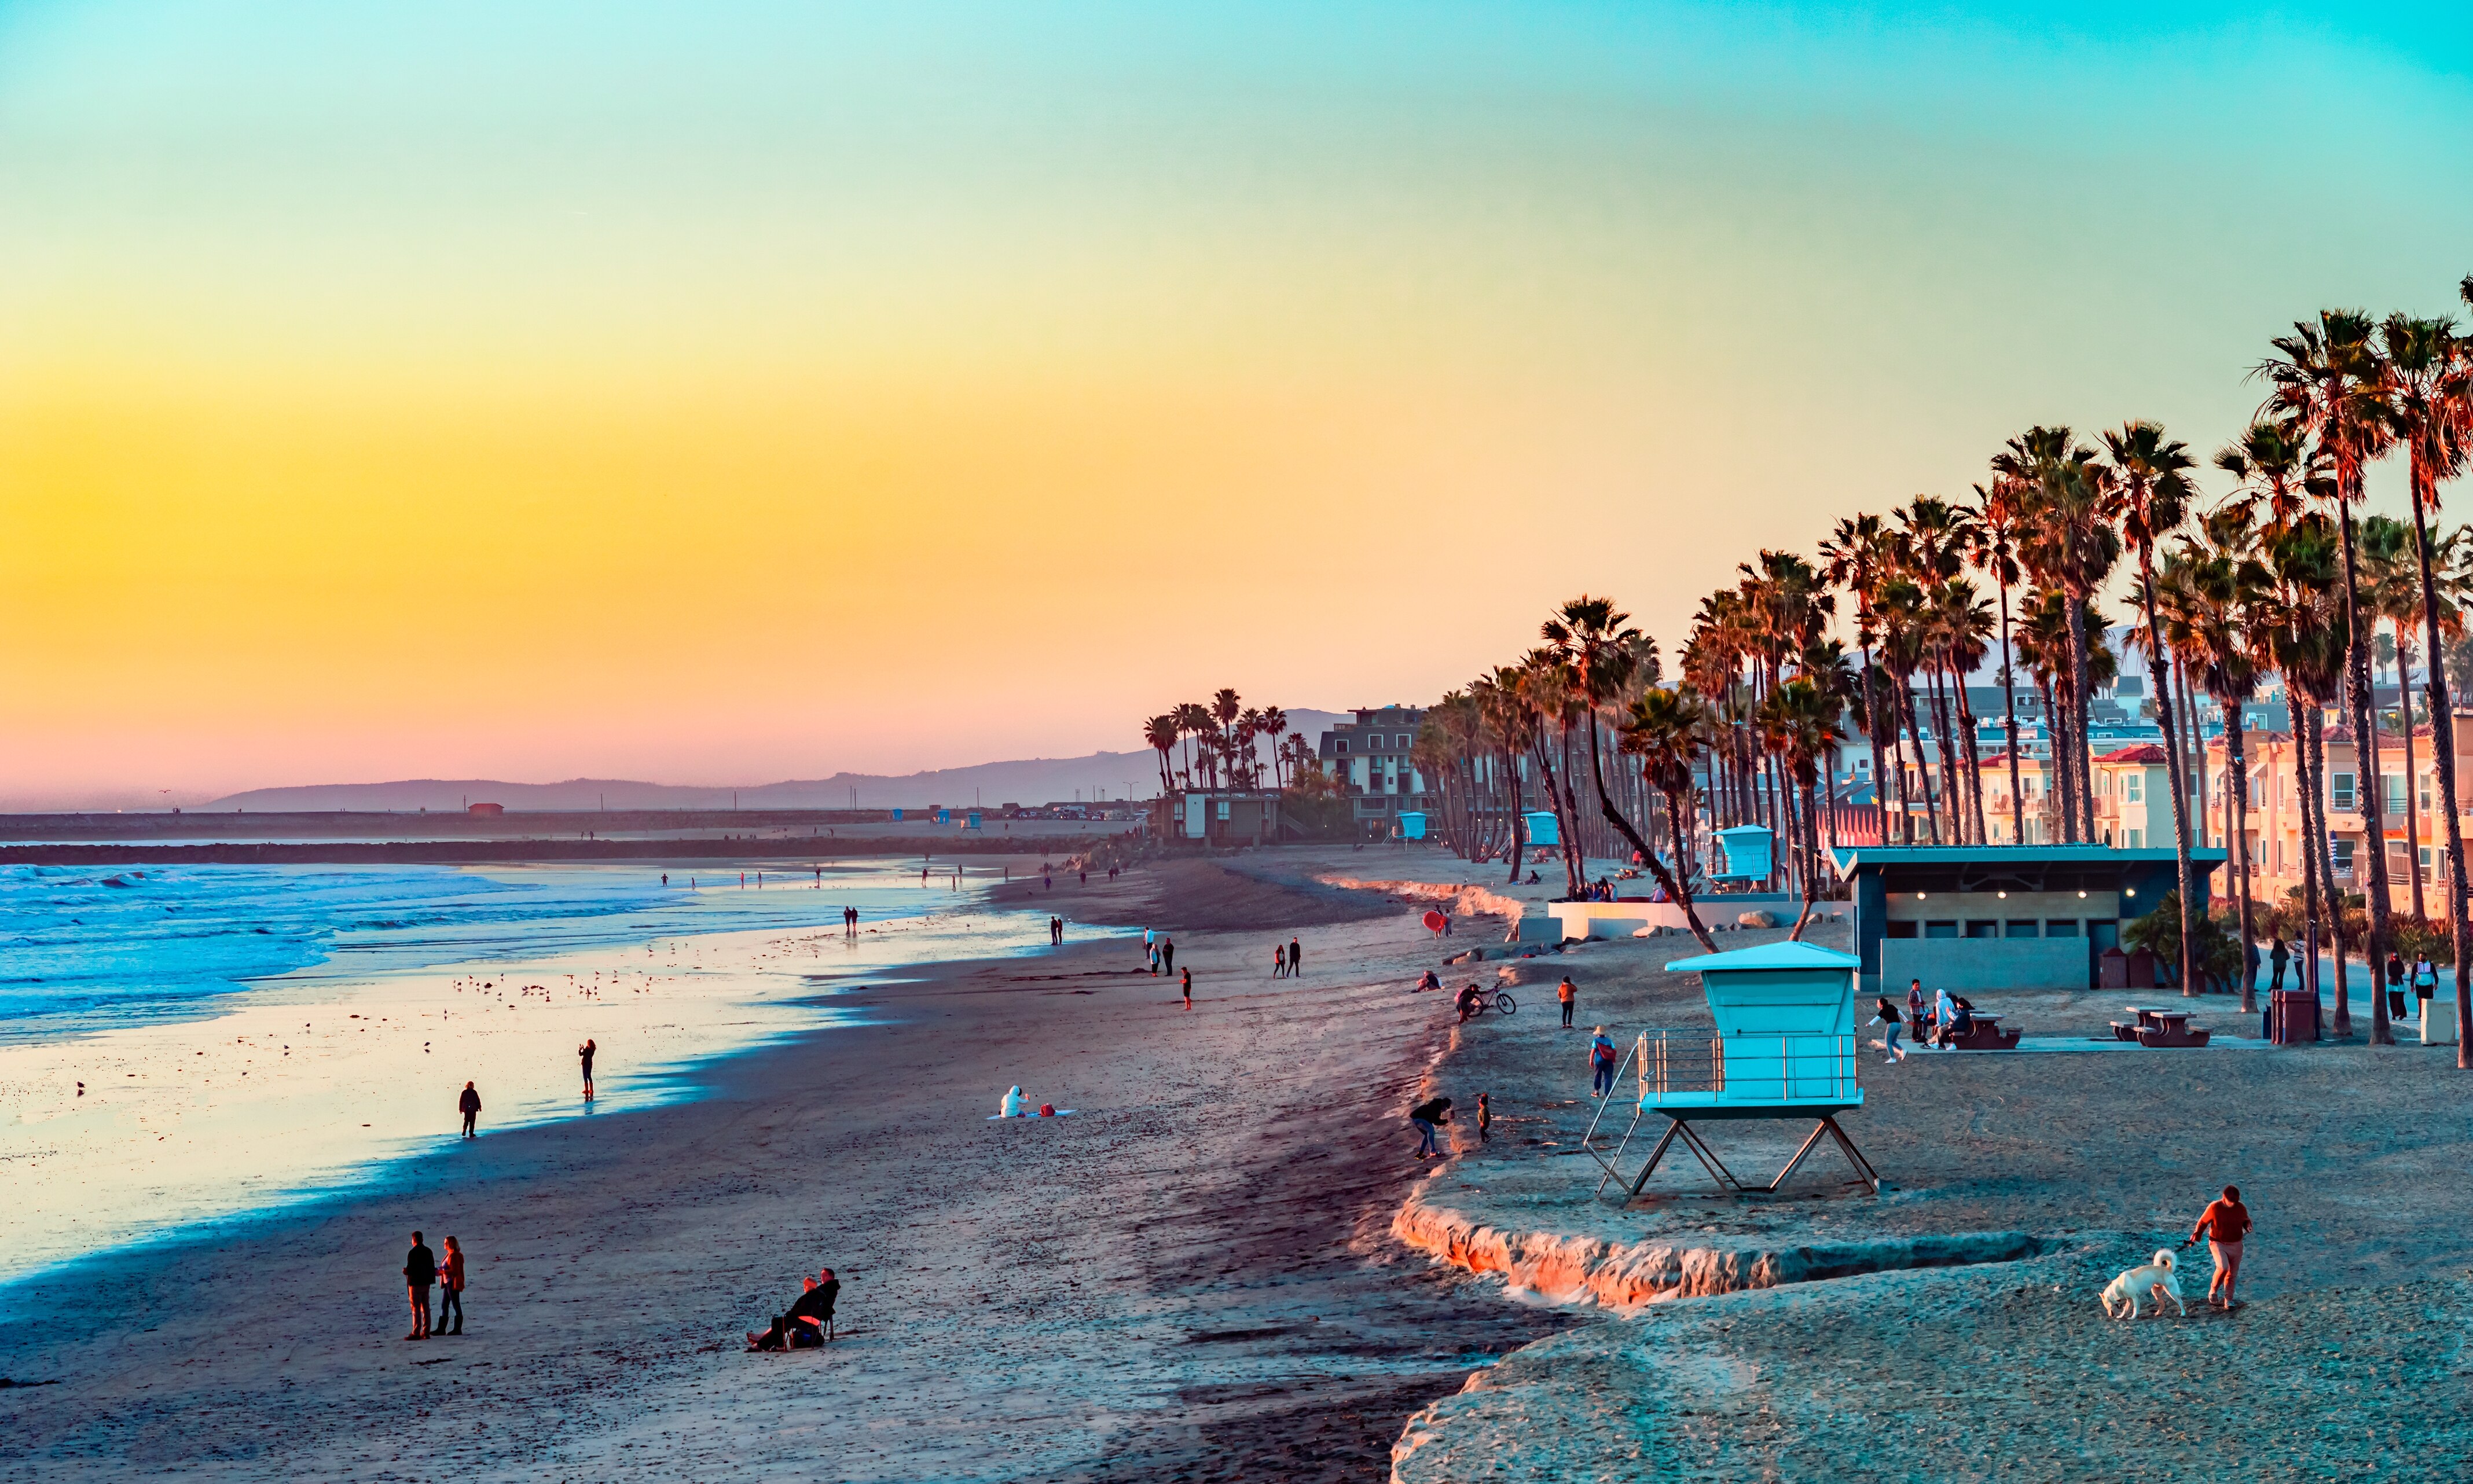 15 Best Things to Do in Oceanside (CA) - The Crazy Tourist